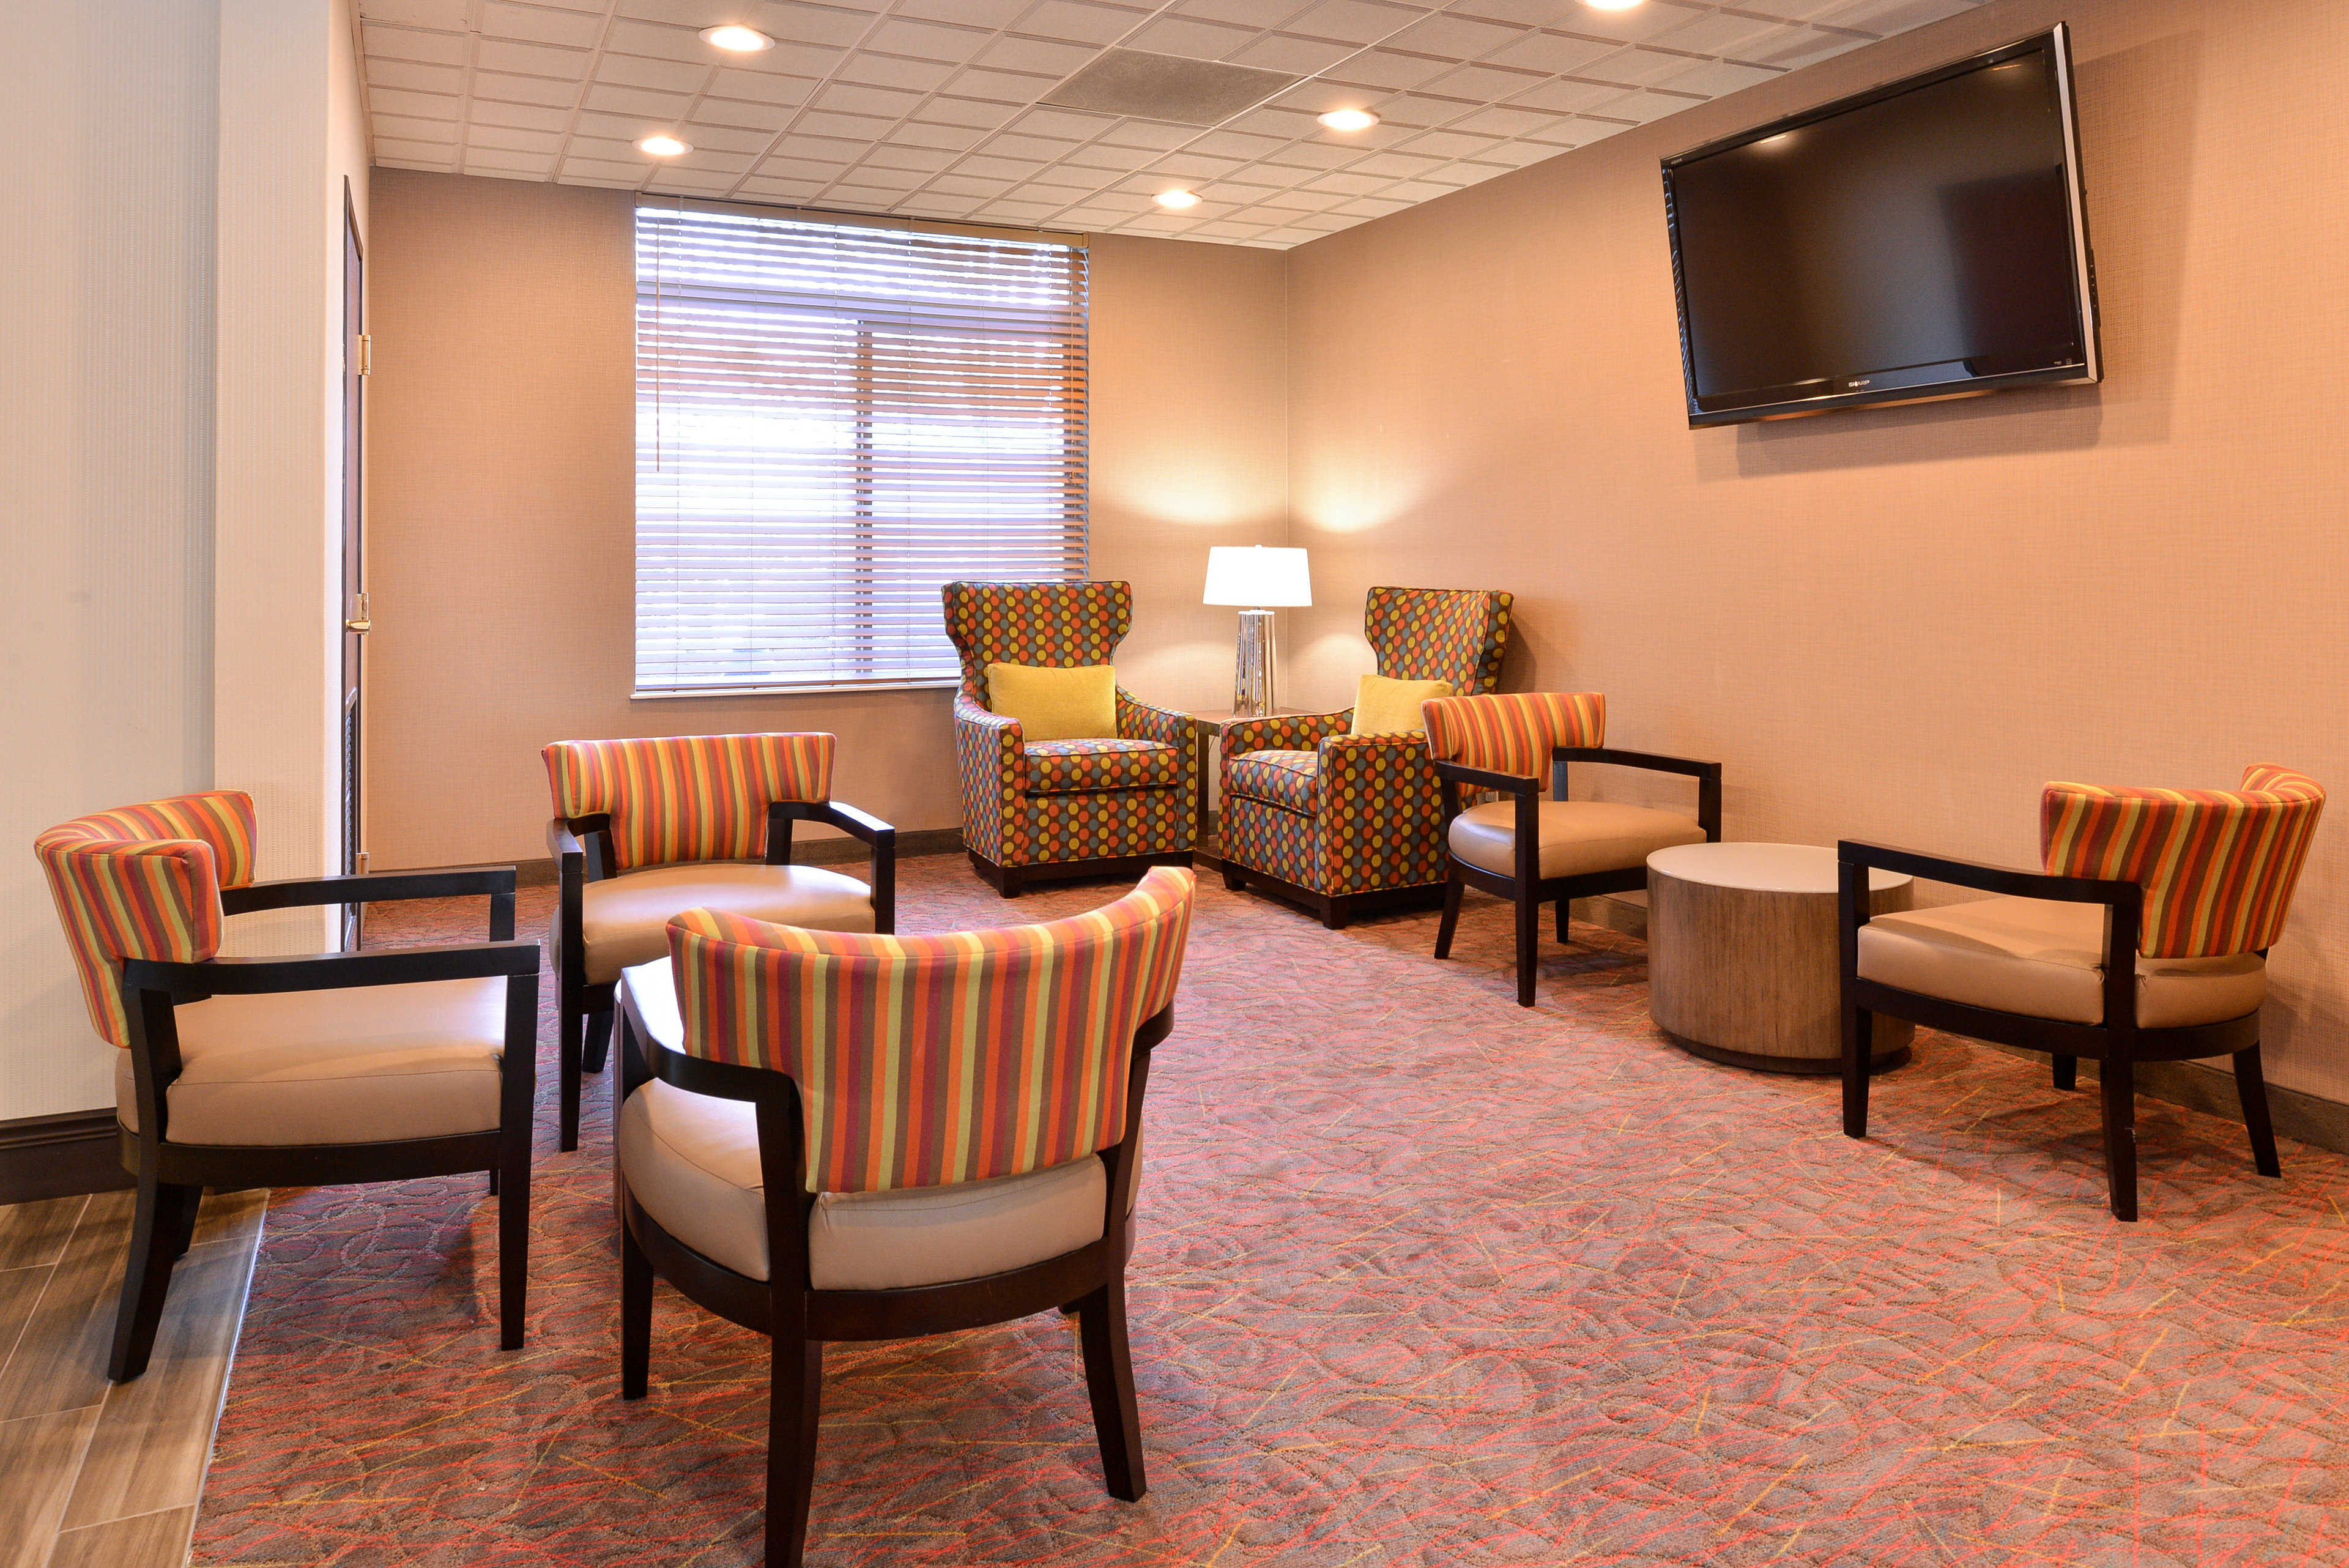 Extra Lobby seating great for impromptu meetings with friends